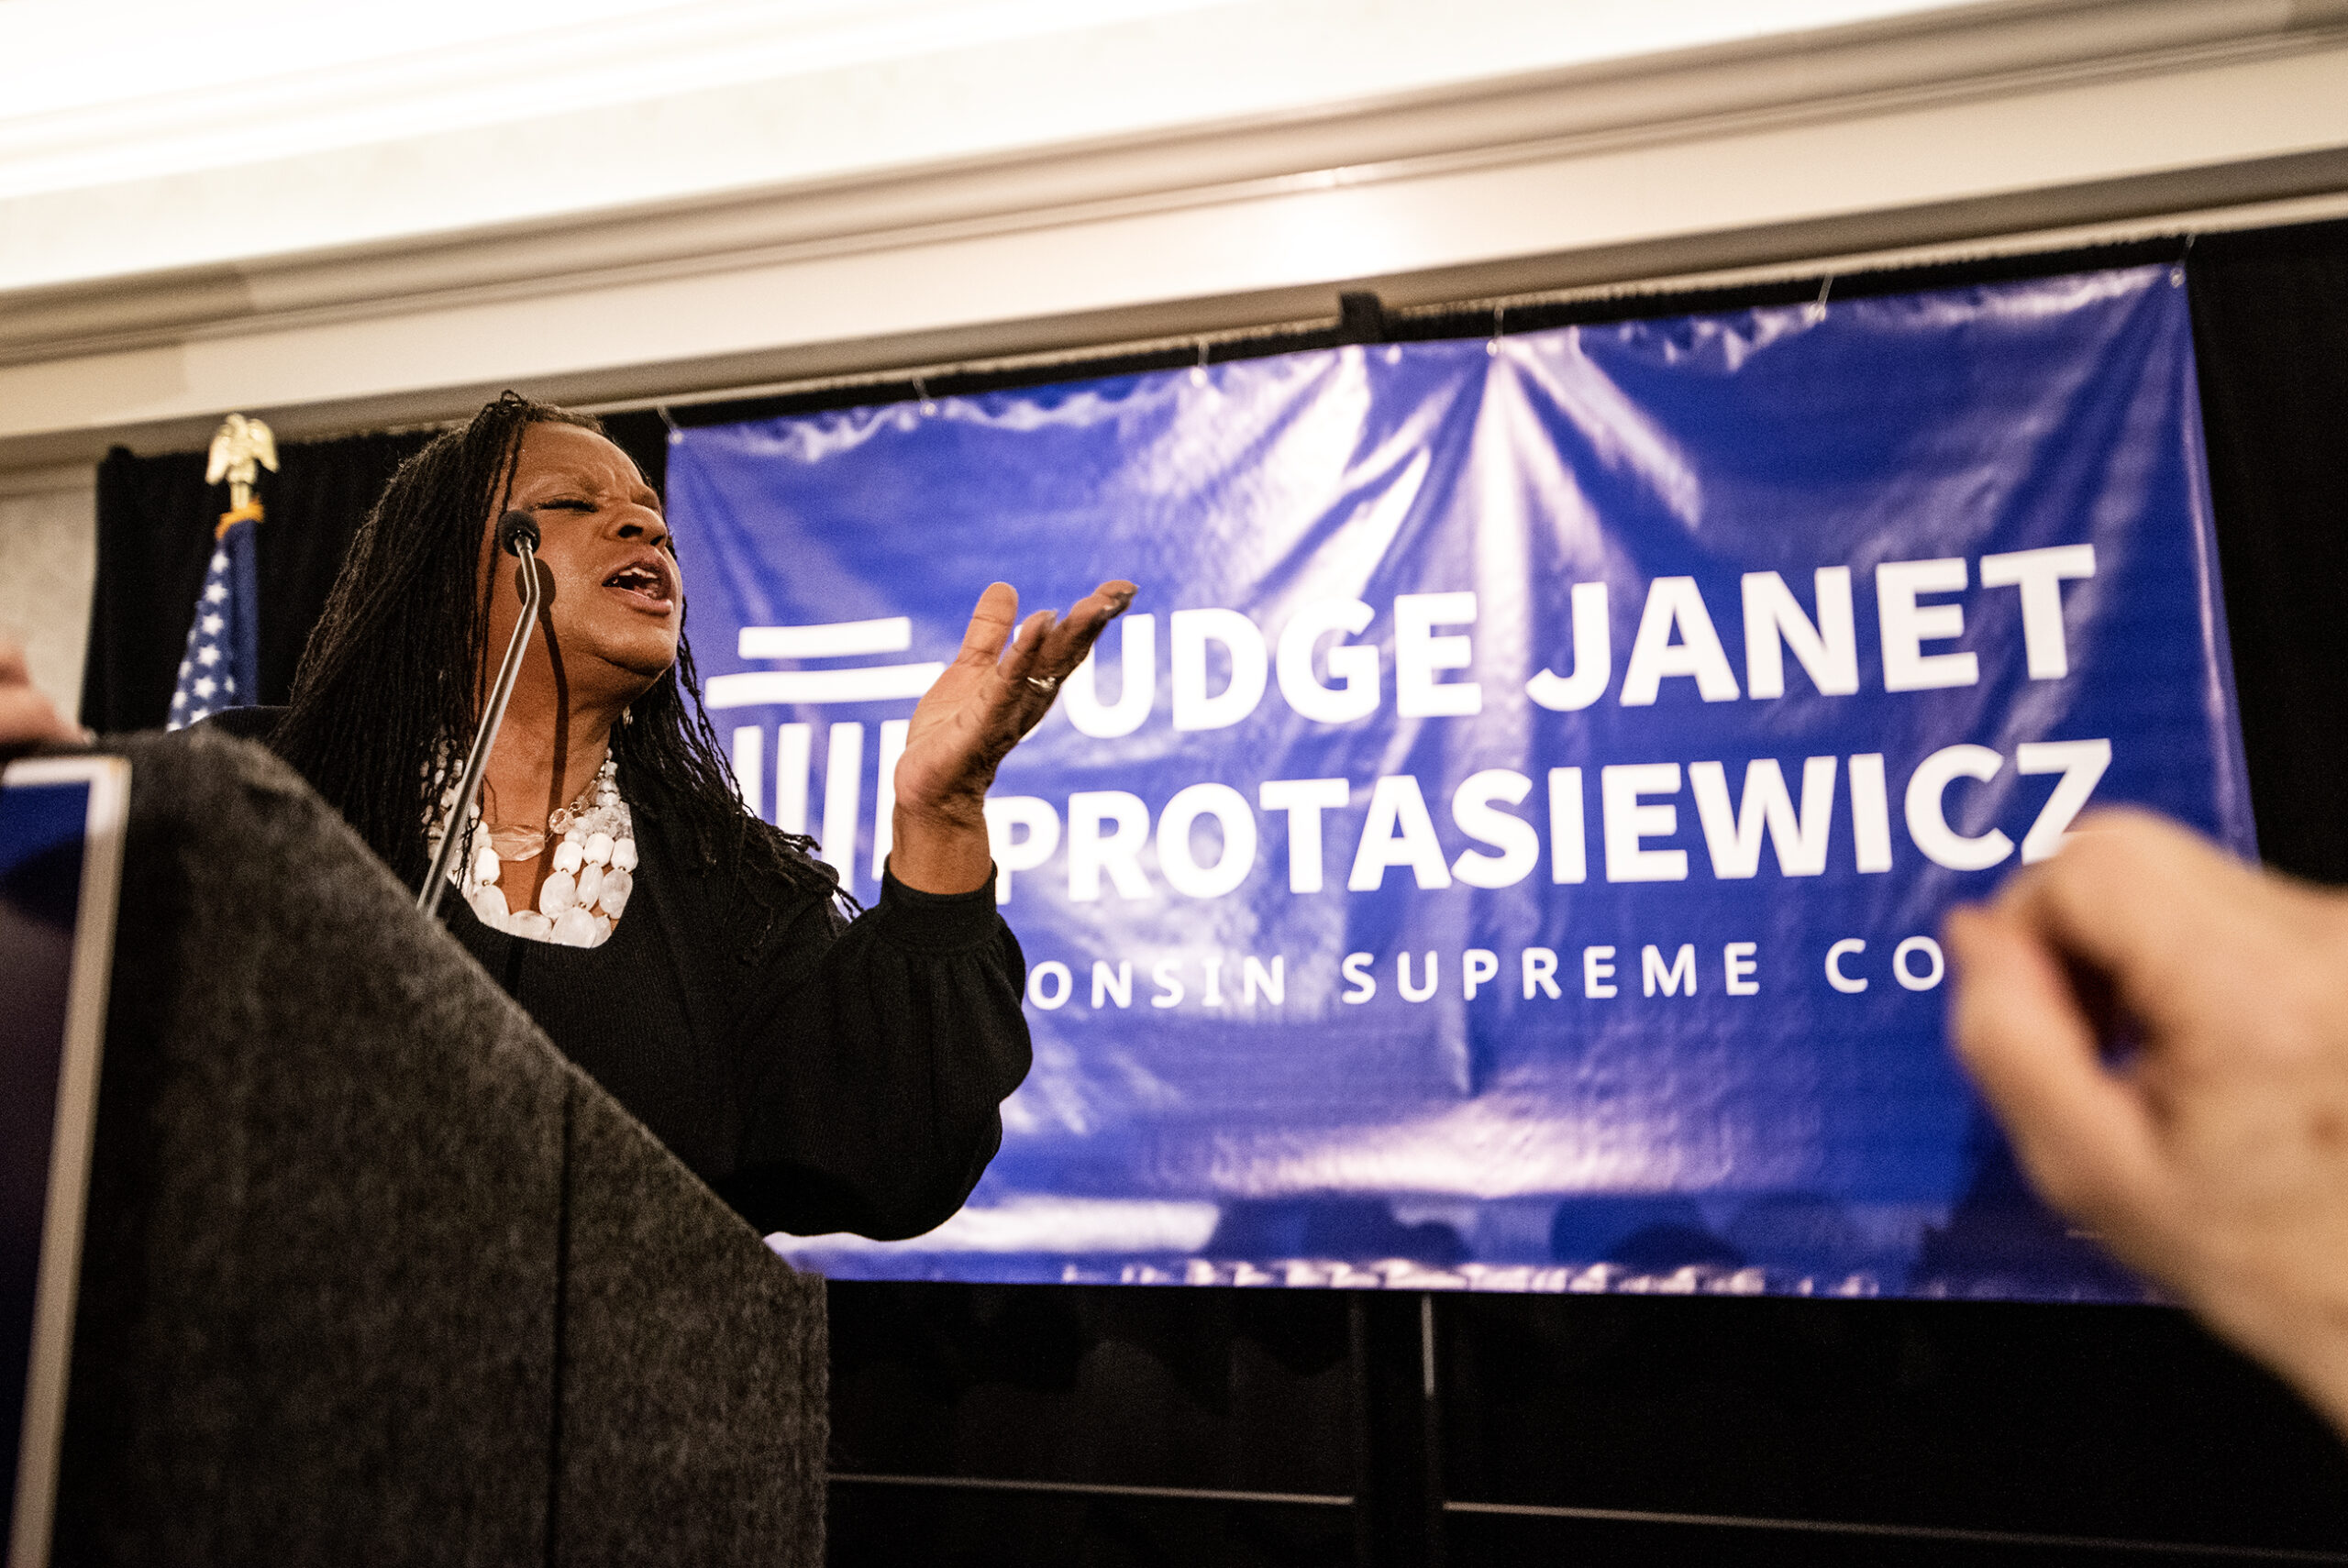 U.S. Rep. Gwen Moore blows a kiss from the podium. A banner for Janet Protasiewicz is seen behind her.